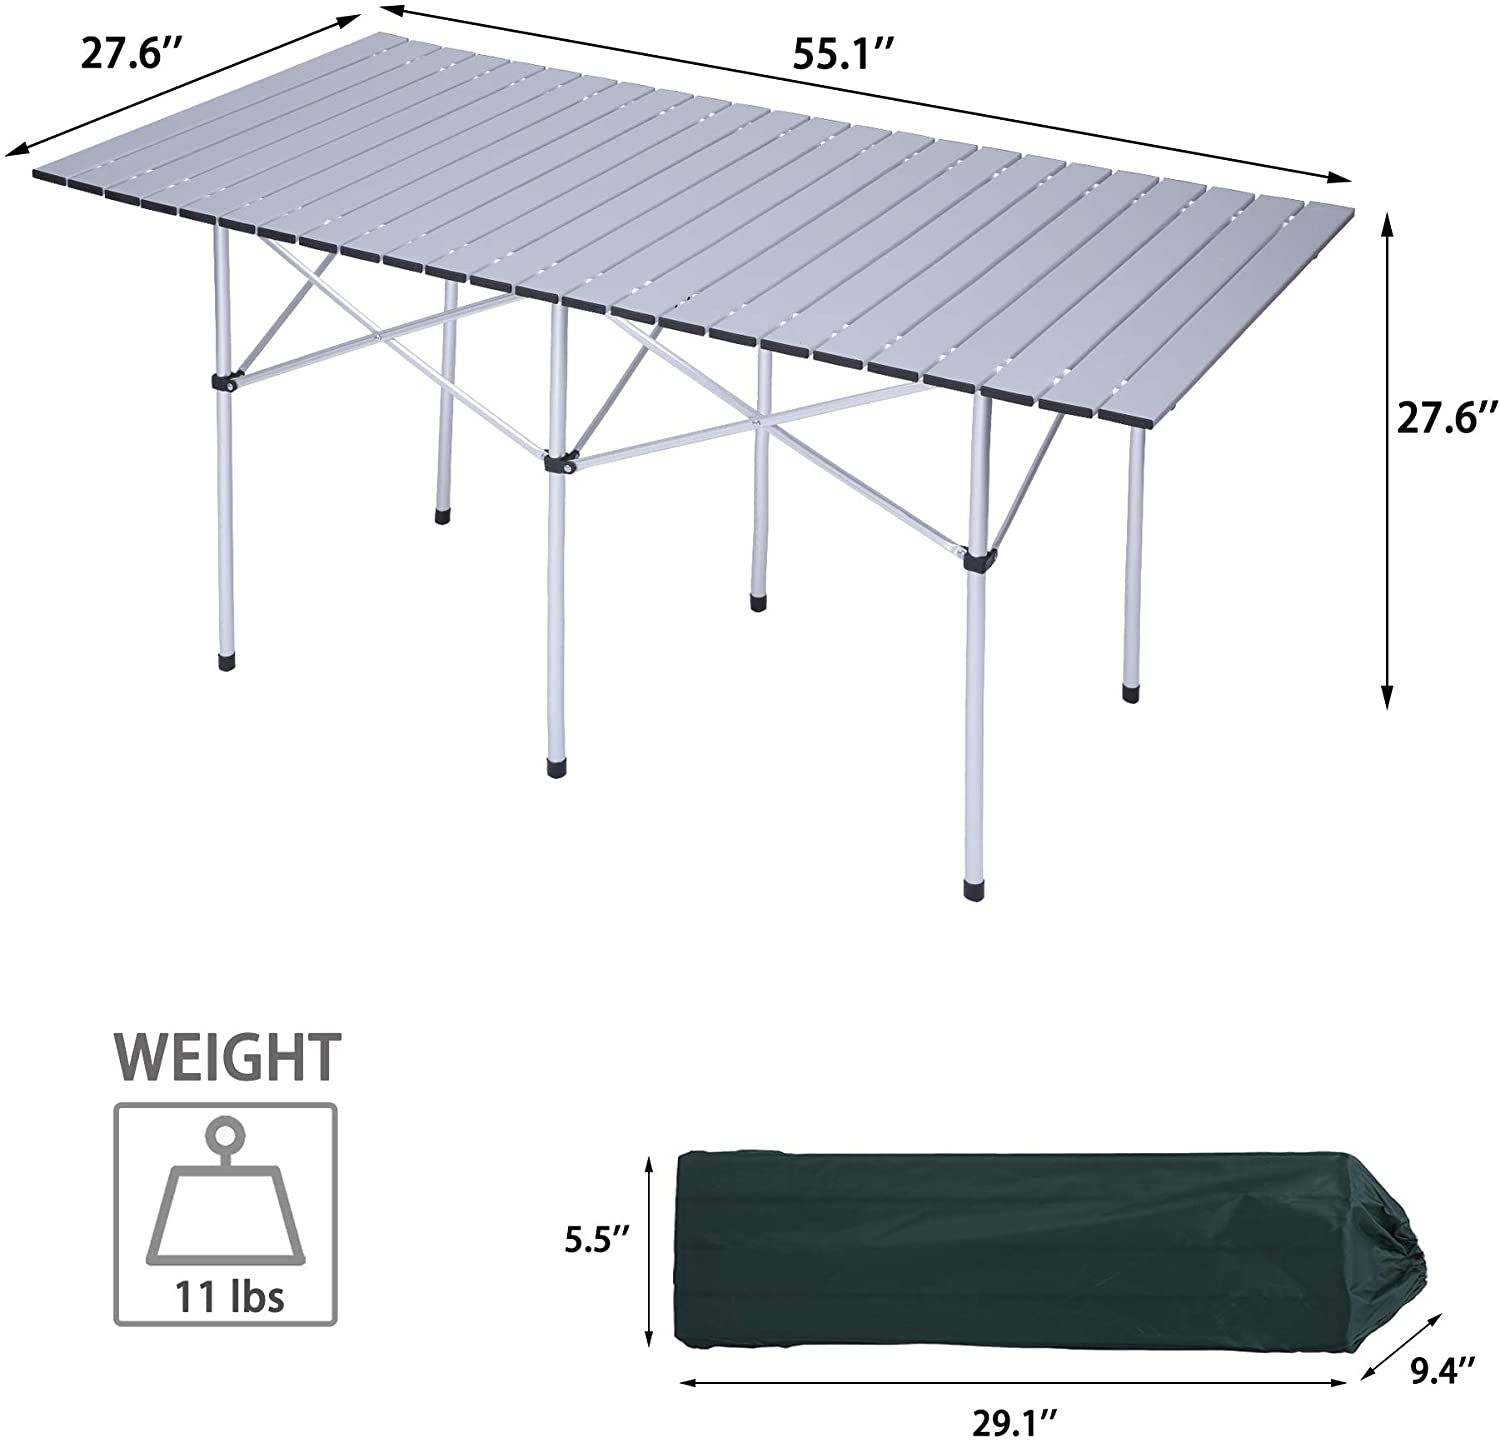 Outdoor Portable Camping Table for 4-6 Roll Top Aluminum Table Lightweight Folding Table, 55.1"x27.6"x27.6"